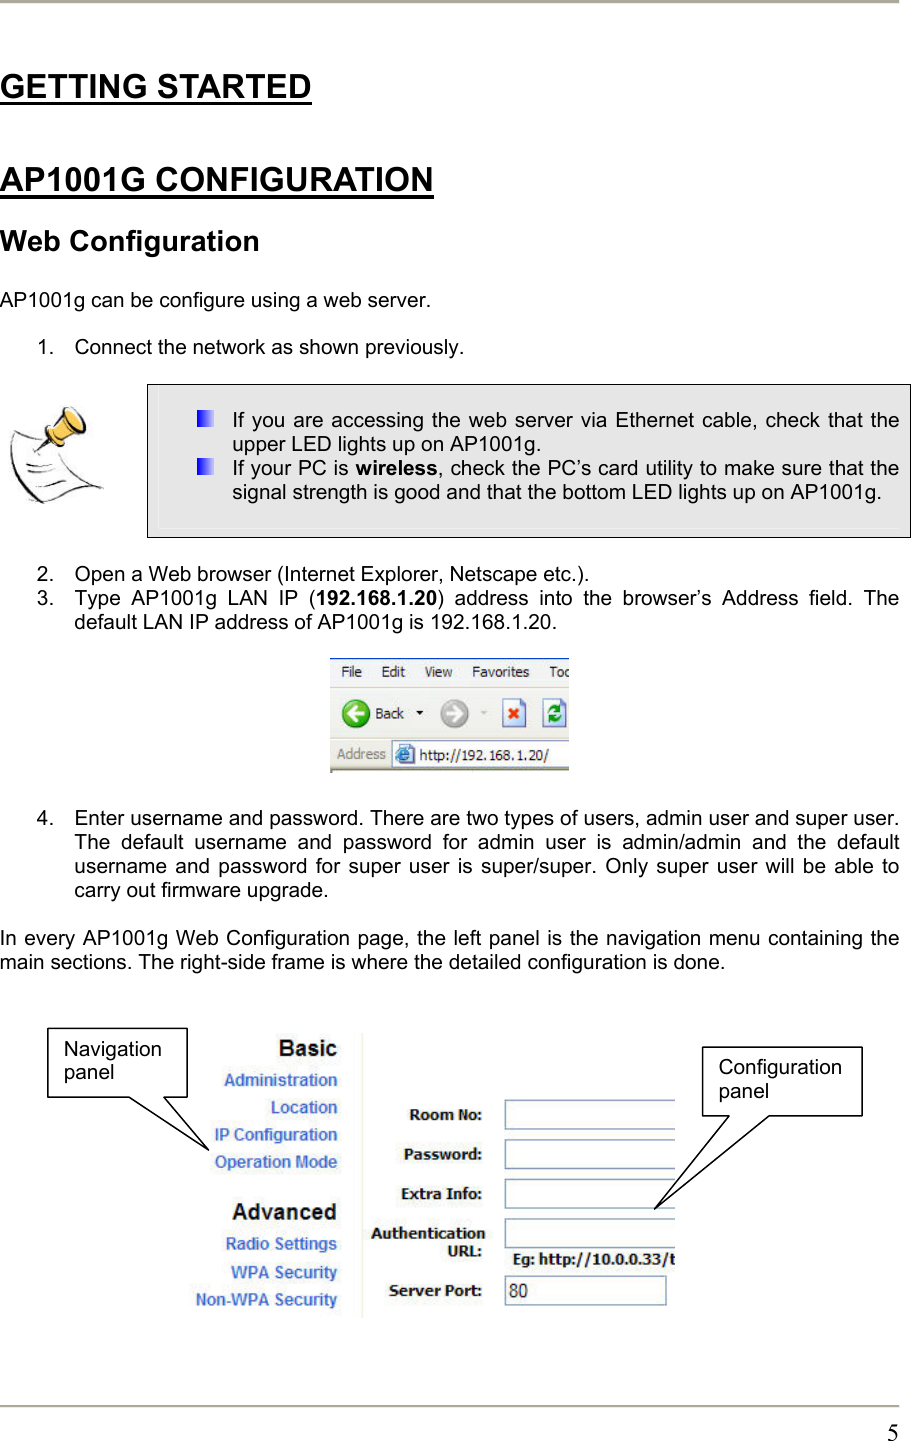       5GETTING STARTED  AP1001G CONFIGURATION Web Configuration  AP1001g can be configure using a web server.   1.  Connect the network as shown previously.       If you are accessing the web server via Ethernet cable, check that the upper LED lights up on AP1001g.  If your PC is wireless, check the PC’s card utility to make sure that the signal strength is good and that the bottom LED lights up on AP1001g.   2.  Open a Web browser (Internet Explorer, Netscape etc.). 3.  Type AP1001g LAN IP (192.168.1.20) address into the browser’s Address field. The default LAN IP address of AP1001g is 192.168.1.20.        4.  Enter username and password. There are two types of users, admin user and super user. The default username and password for admin user is admin/admin and the default username and password for super user is super/super. Only super user will be able to carry out firmware upgrade.  In every AP1001g Web Configuration page, the left panel is the navigation menu containing the main sections. The right-side frame is where the detailed configuration is done.              Configuration panel Navigation panel 